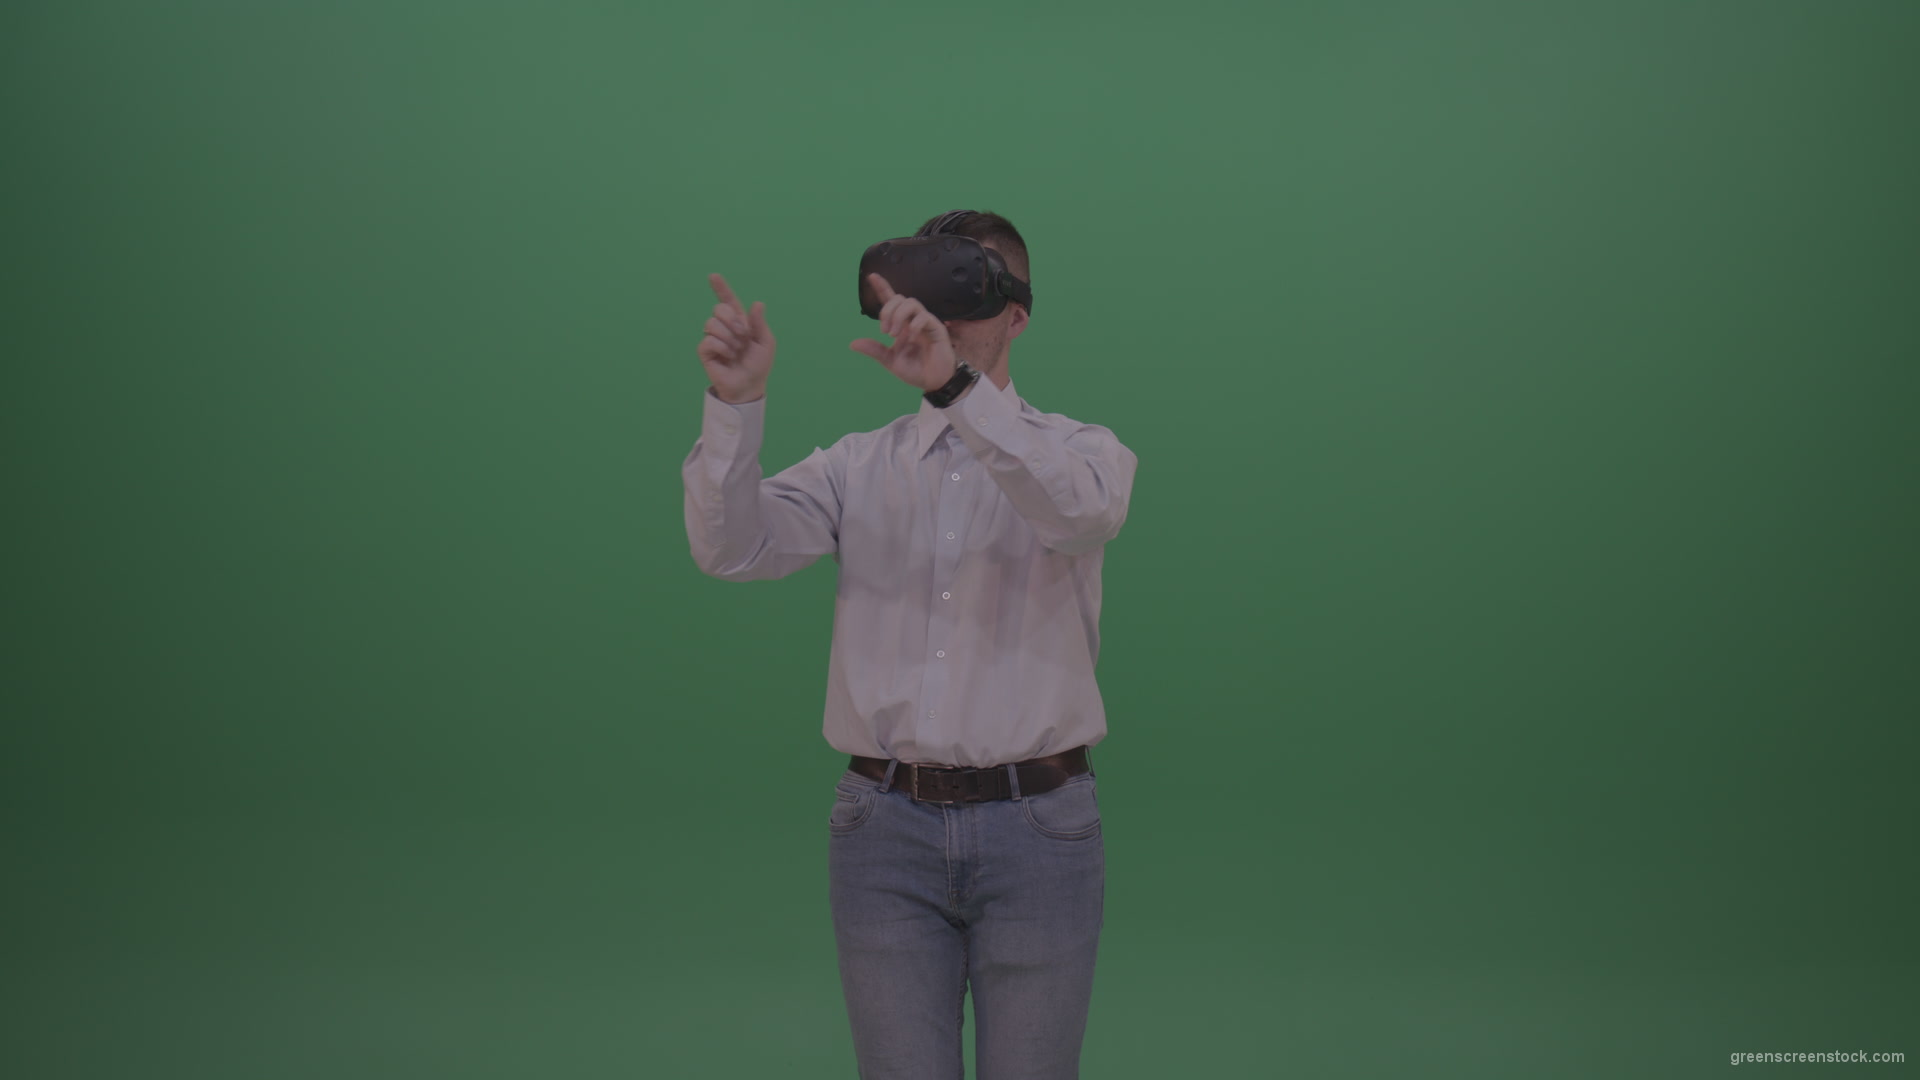 Young_Handsome_Man_With_Black_Hair_Wearing_White_Shirt_Using_Virtual_Glasses_Clicking_Touch_Pad_On_Green_Screen_Background_Wall_009 Green Screen Stock